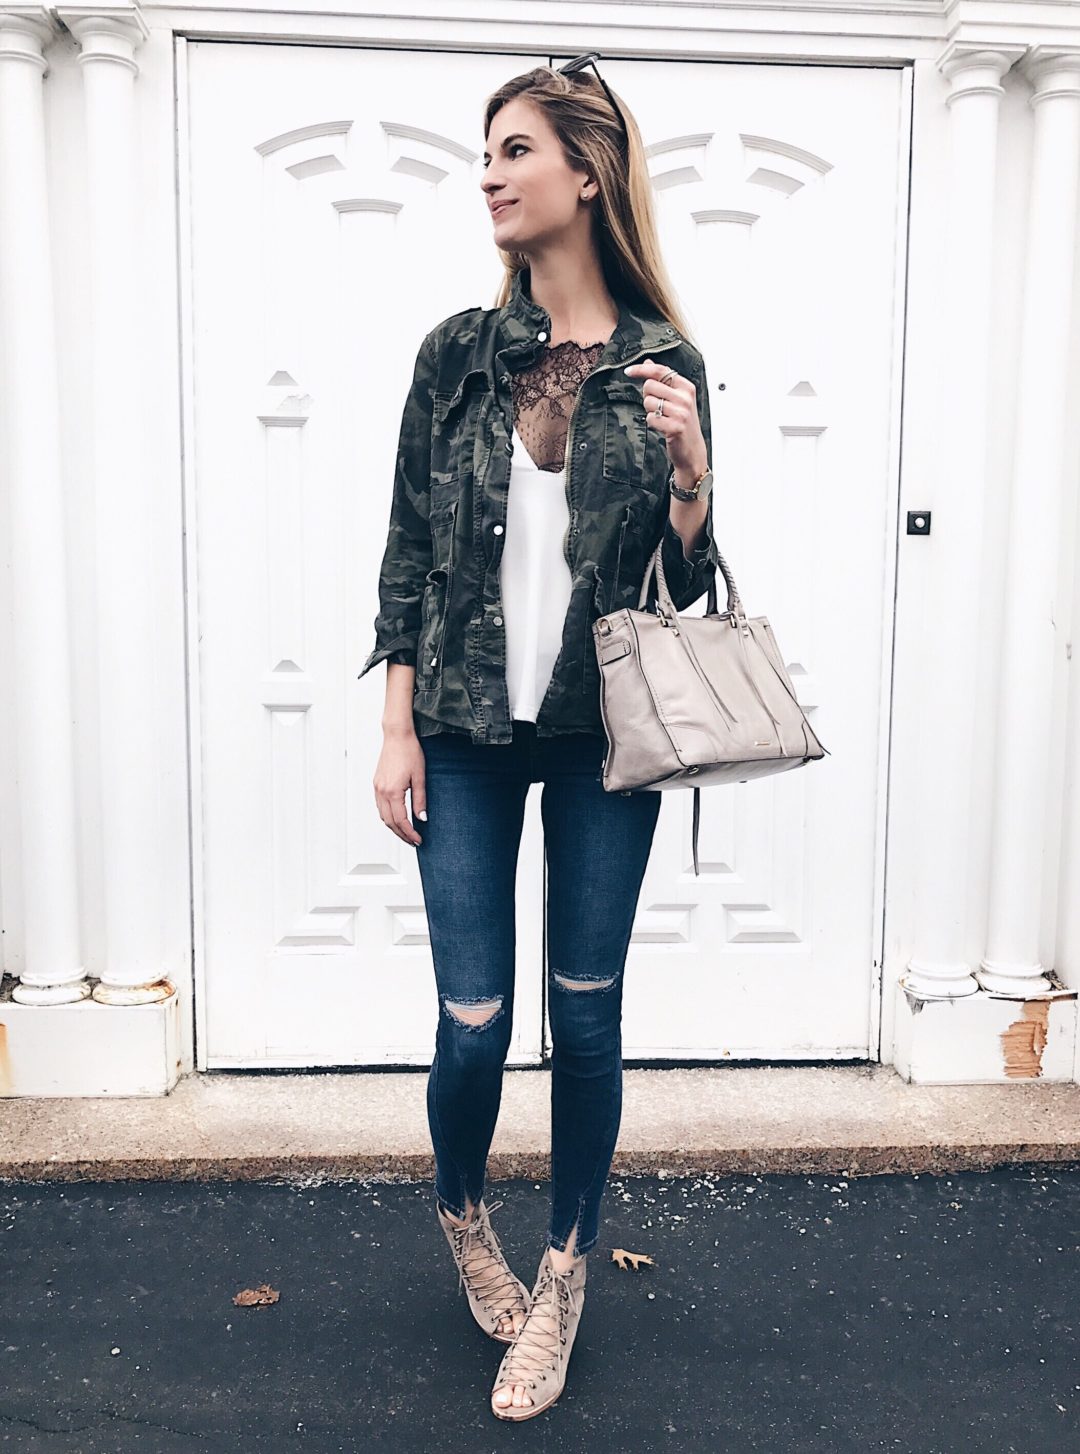 spring outfit ideas: camo jacket with lace insert camisole